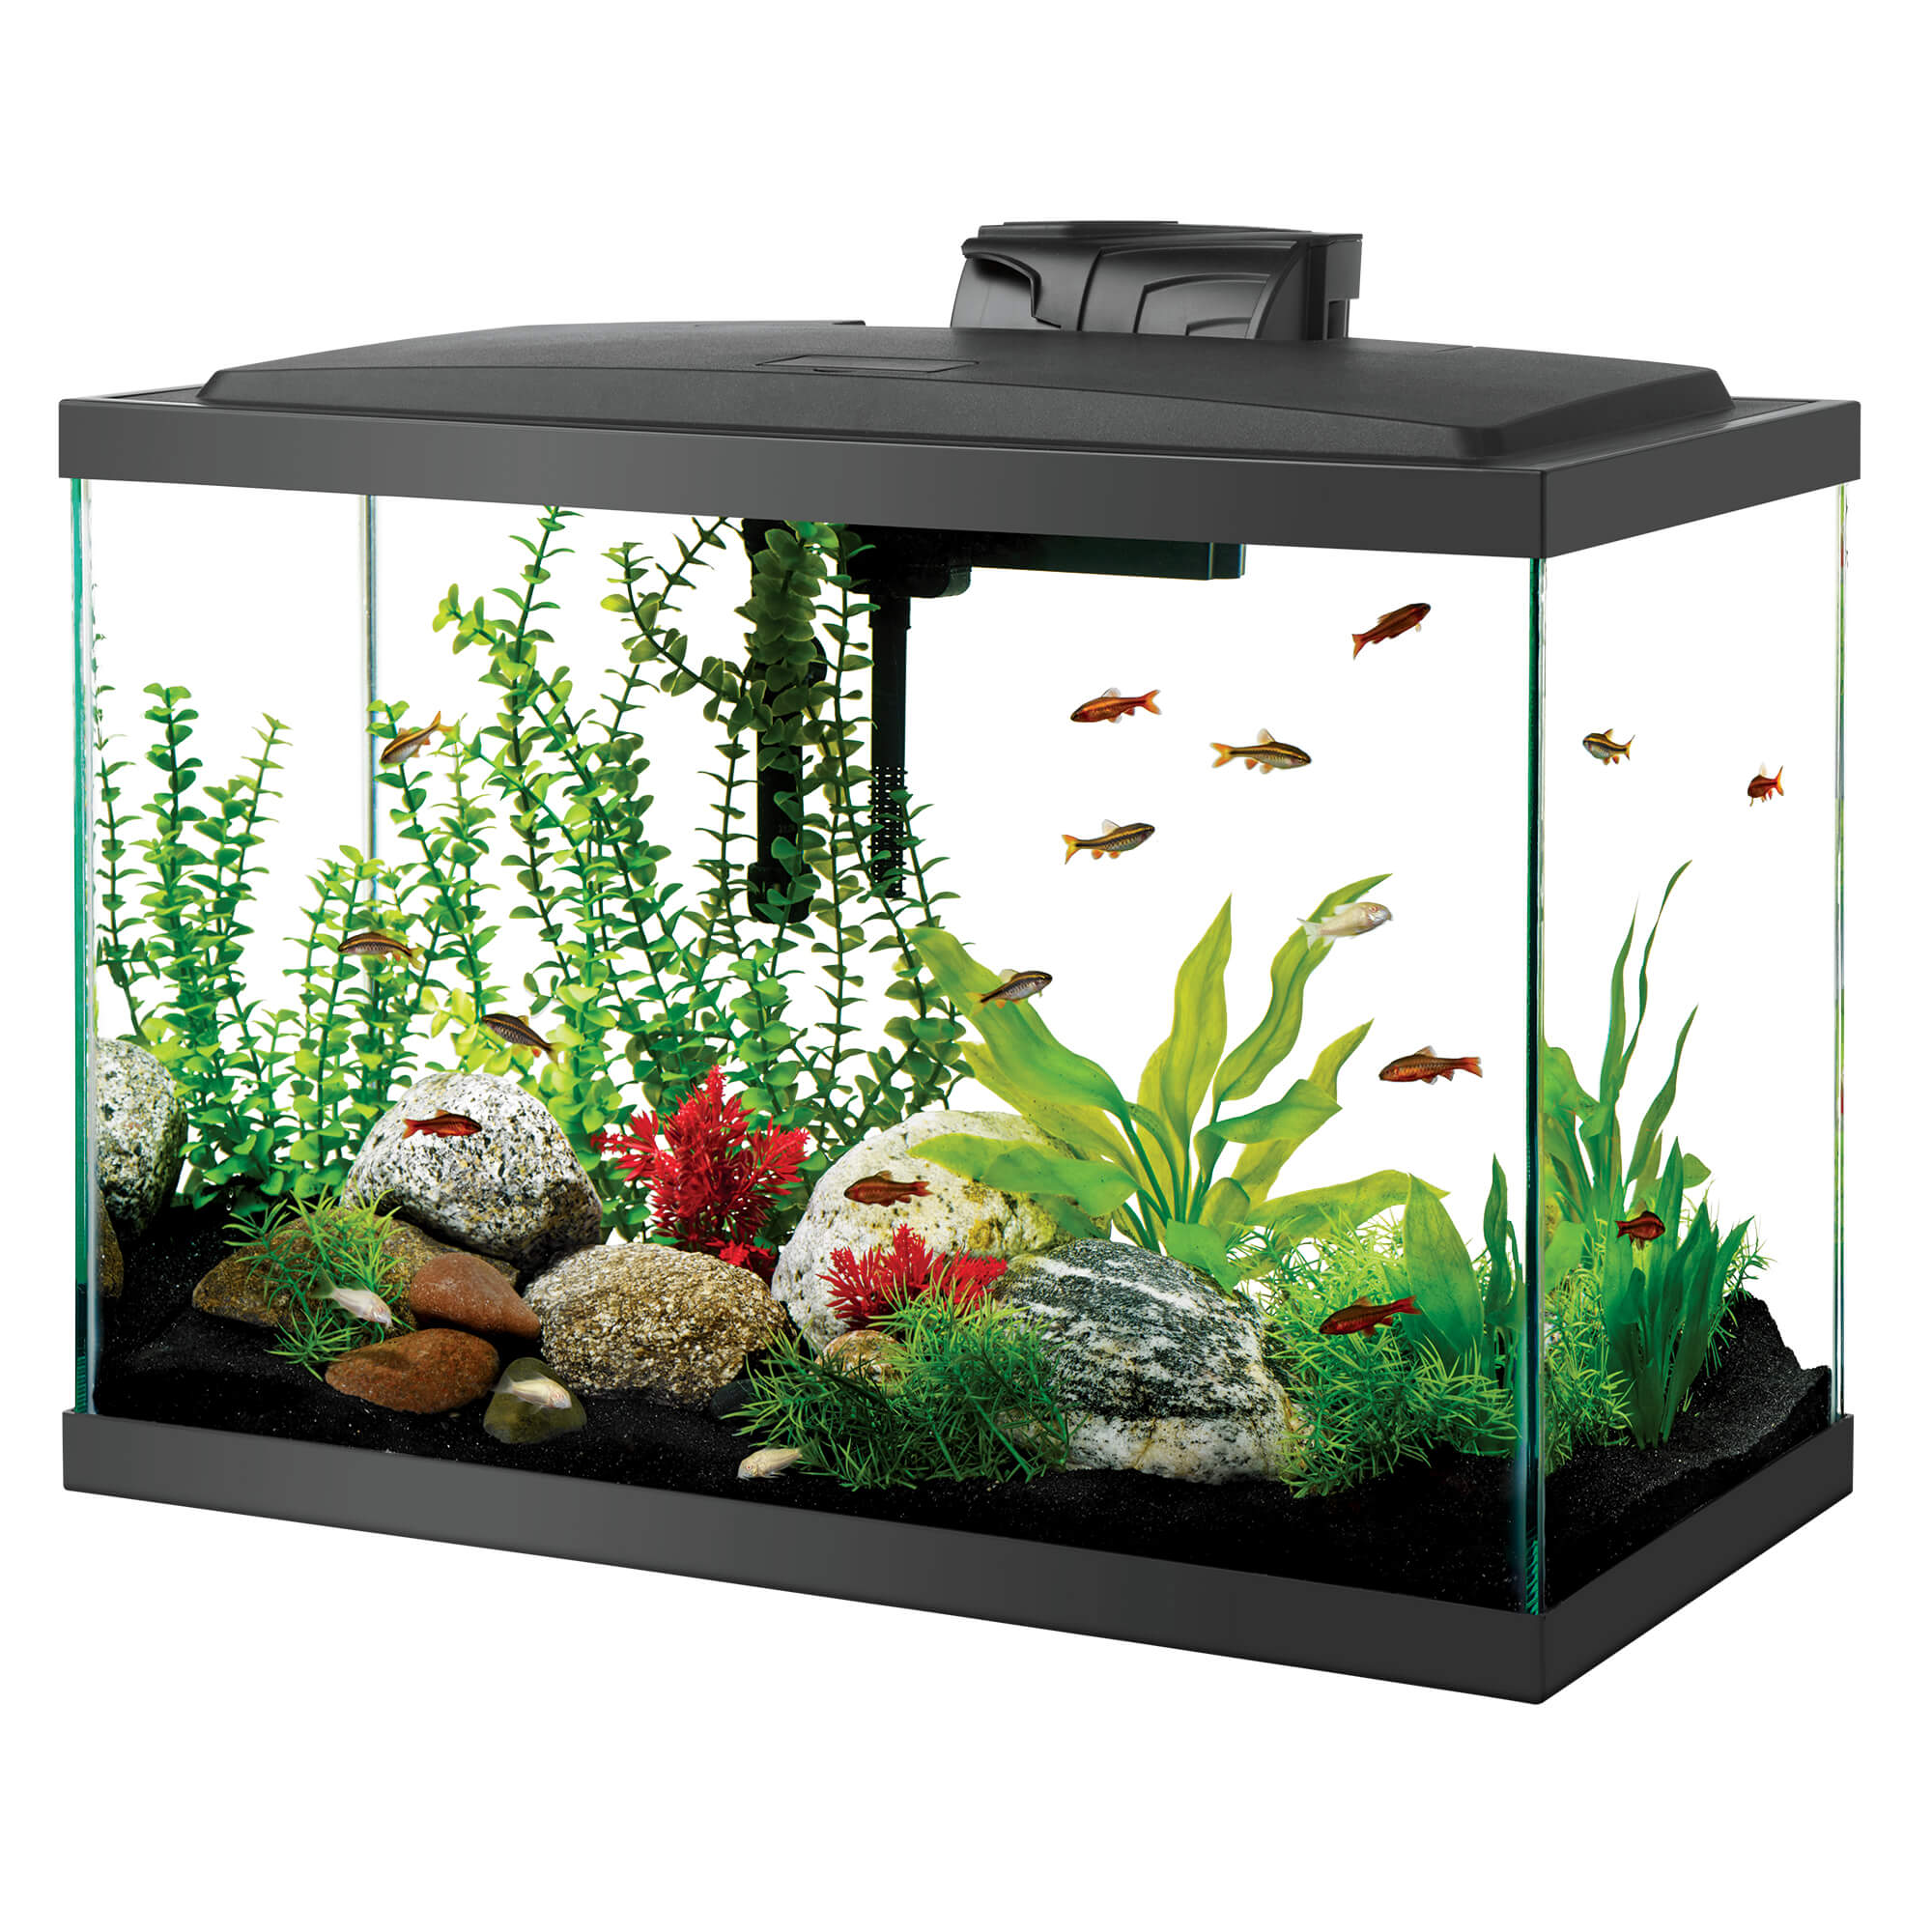 the temptation to go to petco has never been stronger, i don't even have  space for another tank but… I NEED IT : r/Aquariums